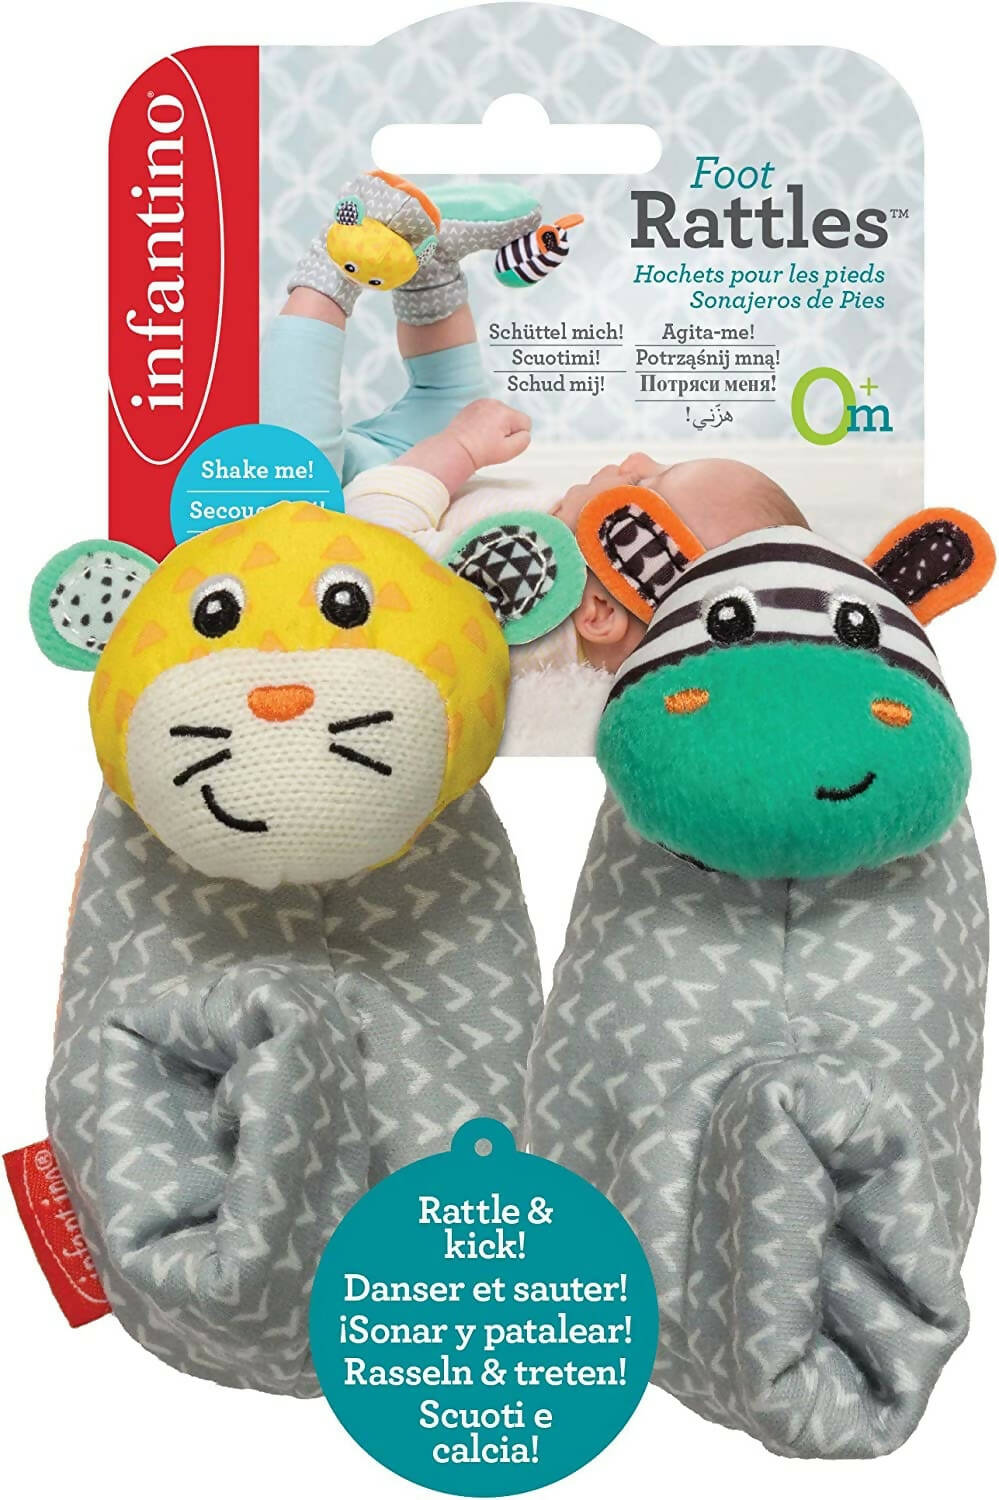 Infantino | Foot Rattles - Zebra/Tiger | Toys & Baby Gear | Brand New